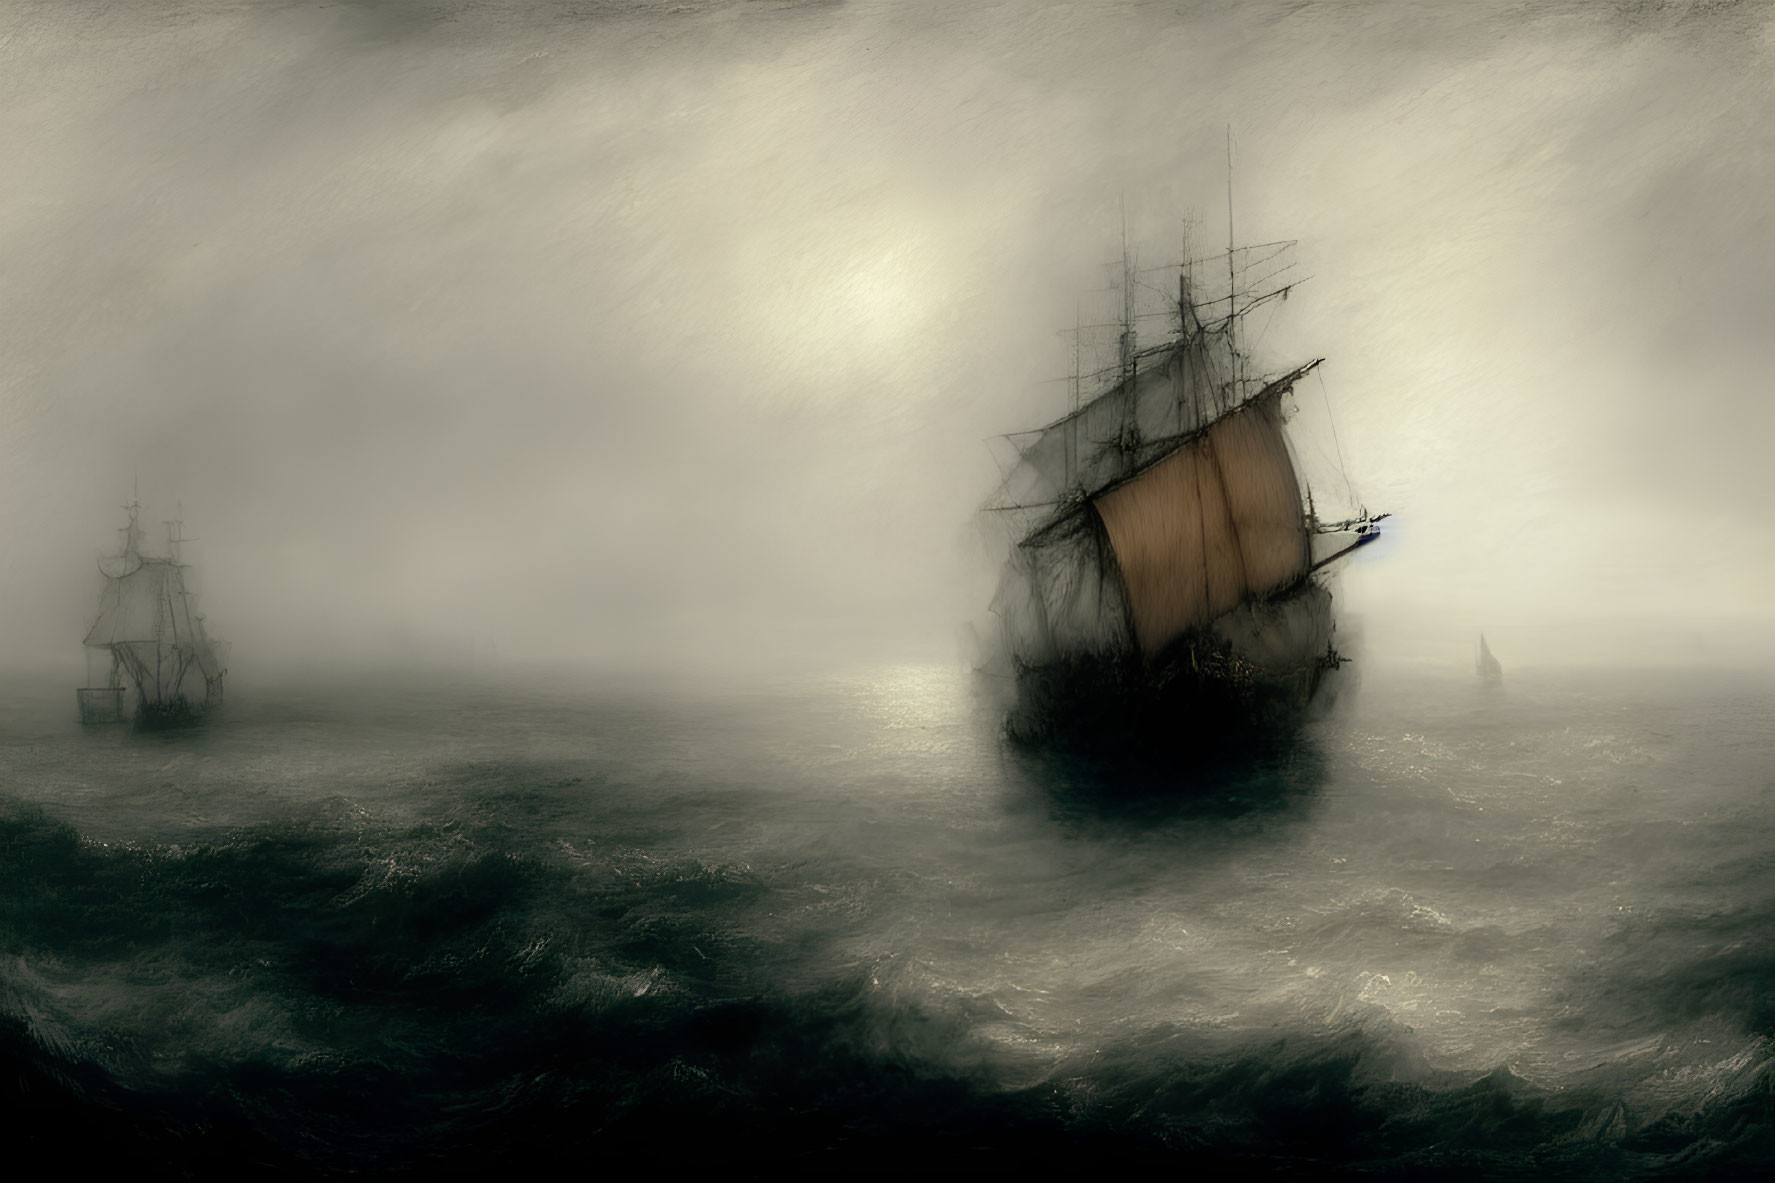 Sailing ships with billowing sails in dense fog over tumultuous sea